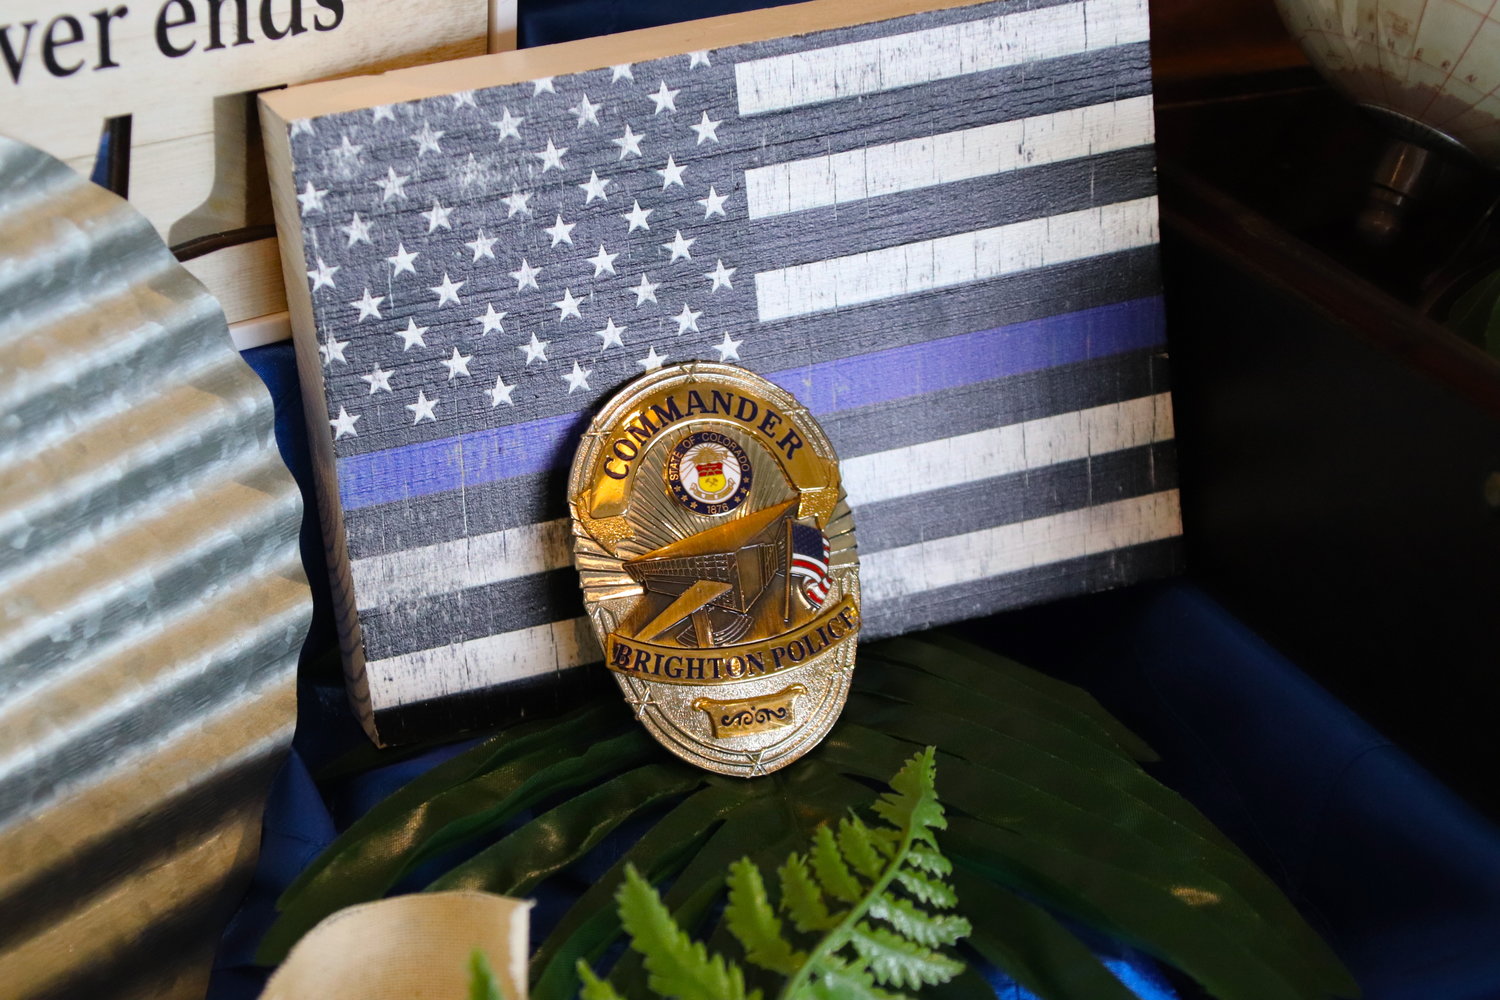 Brighton police Cmdr. Frank Acosta's last badge was on display outside of his funeral Sept. 29 at Henderson's Orchard Church.